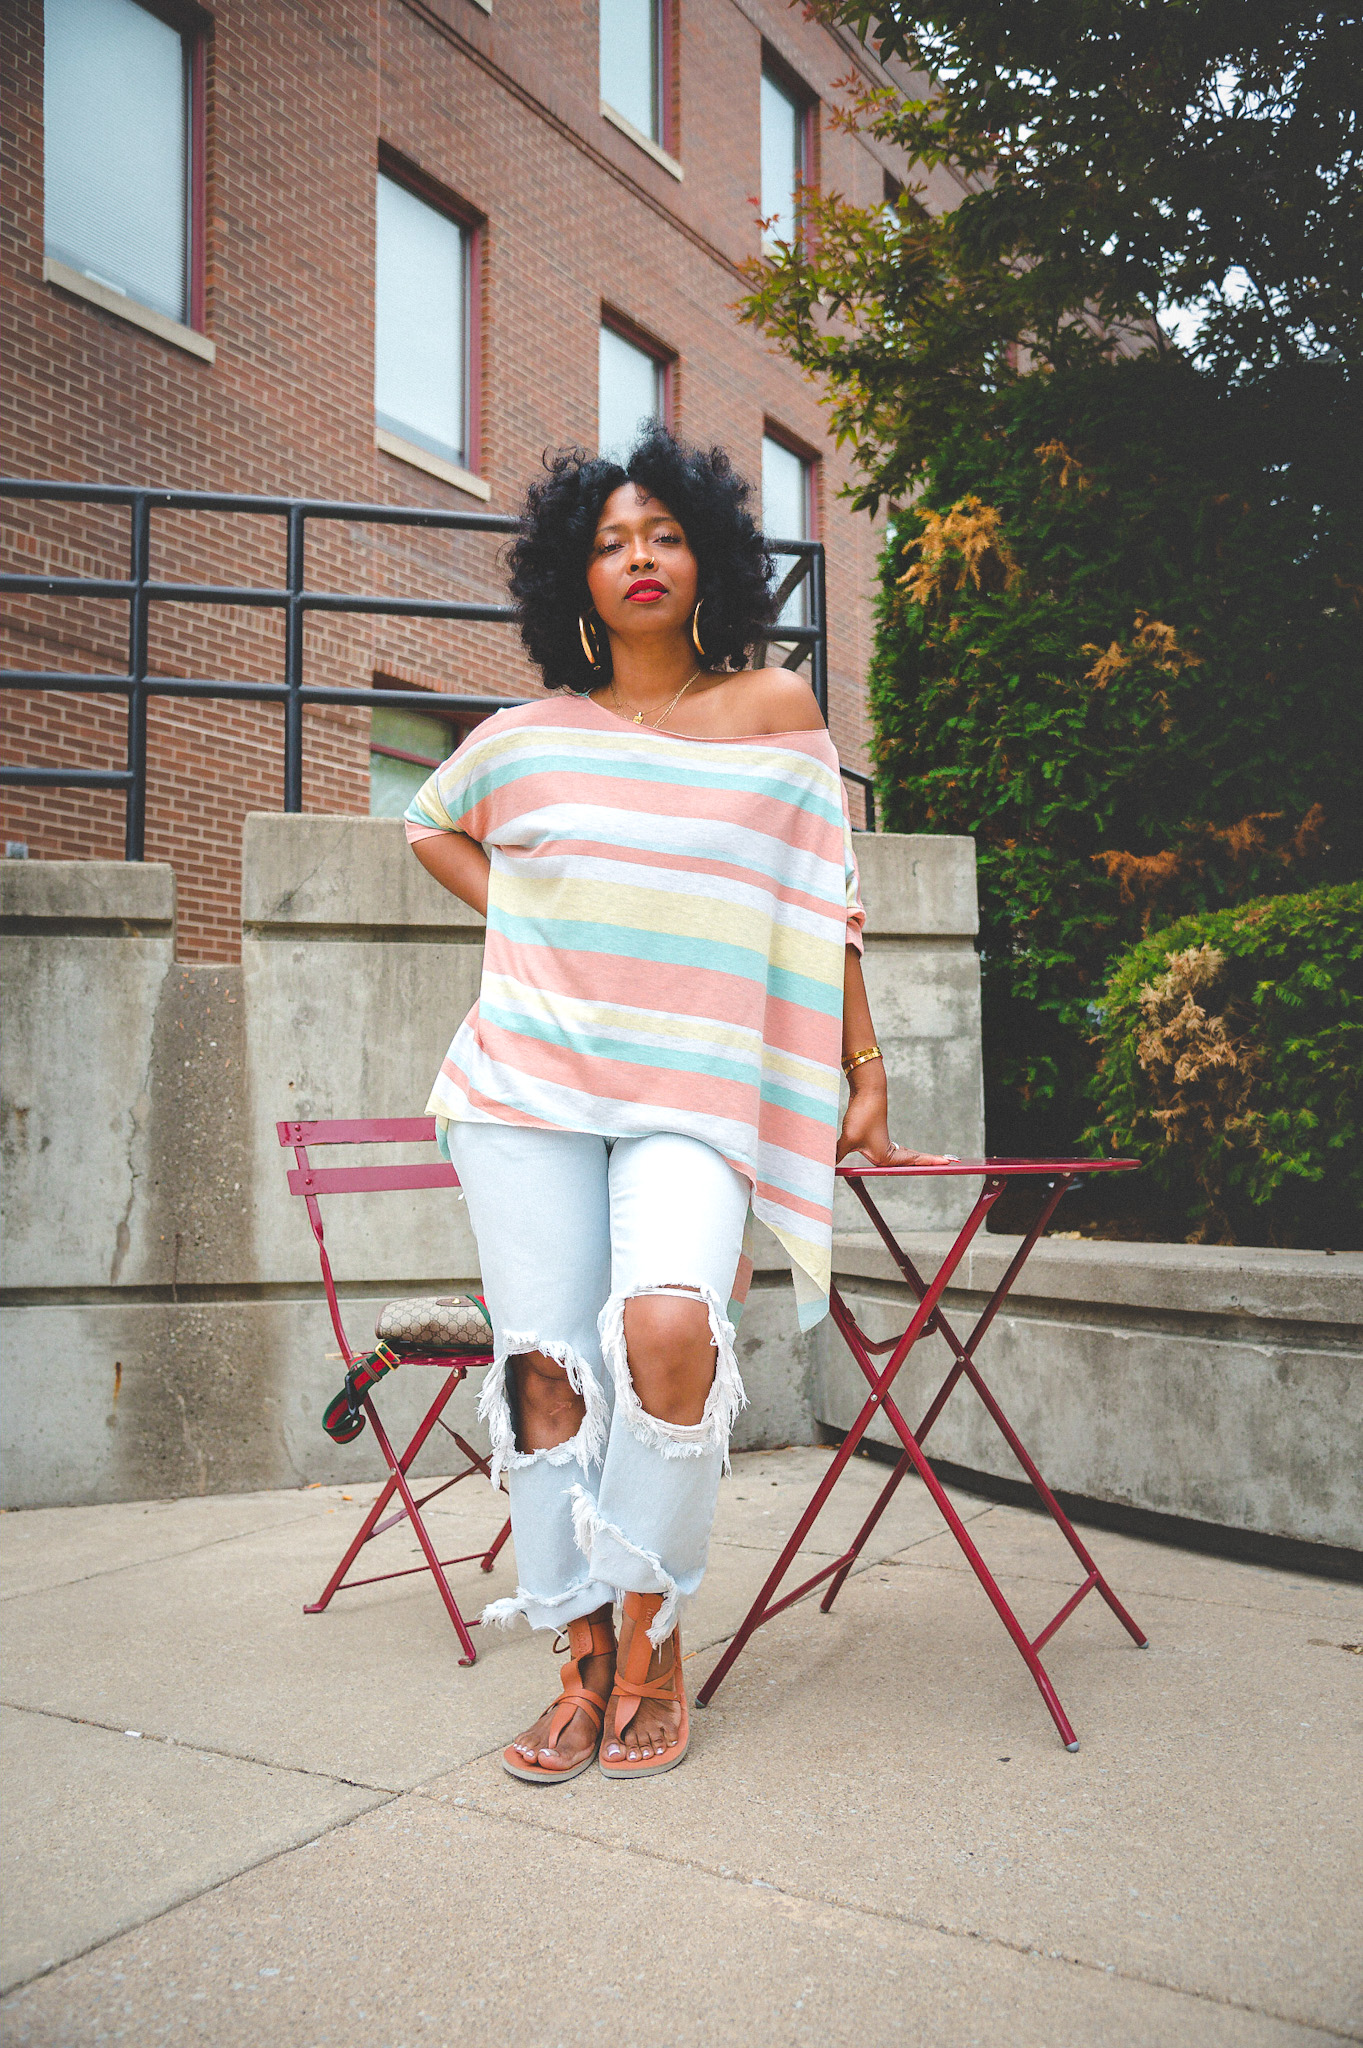 Sweenee Style, Blogger, 2022 Blogger, Black Girls who Blog, Indianapolis Fashion Blog, Indiana Fashion Blog, Brown Girls who blog, Natural hair blog, Free People Maggie Jeans, Free People Style, Natural Hair Style Ideas, What to wear during the day